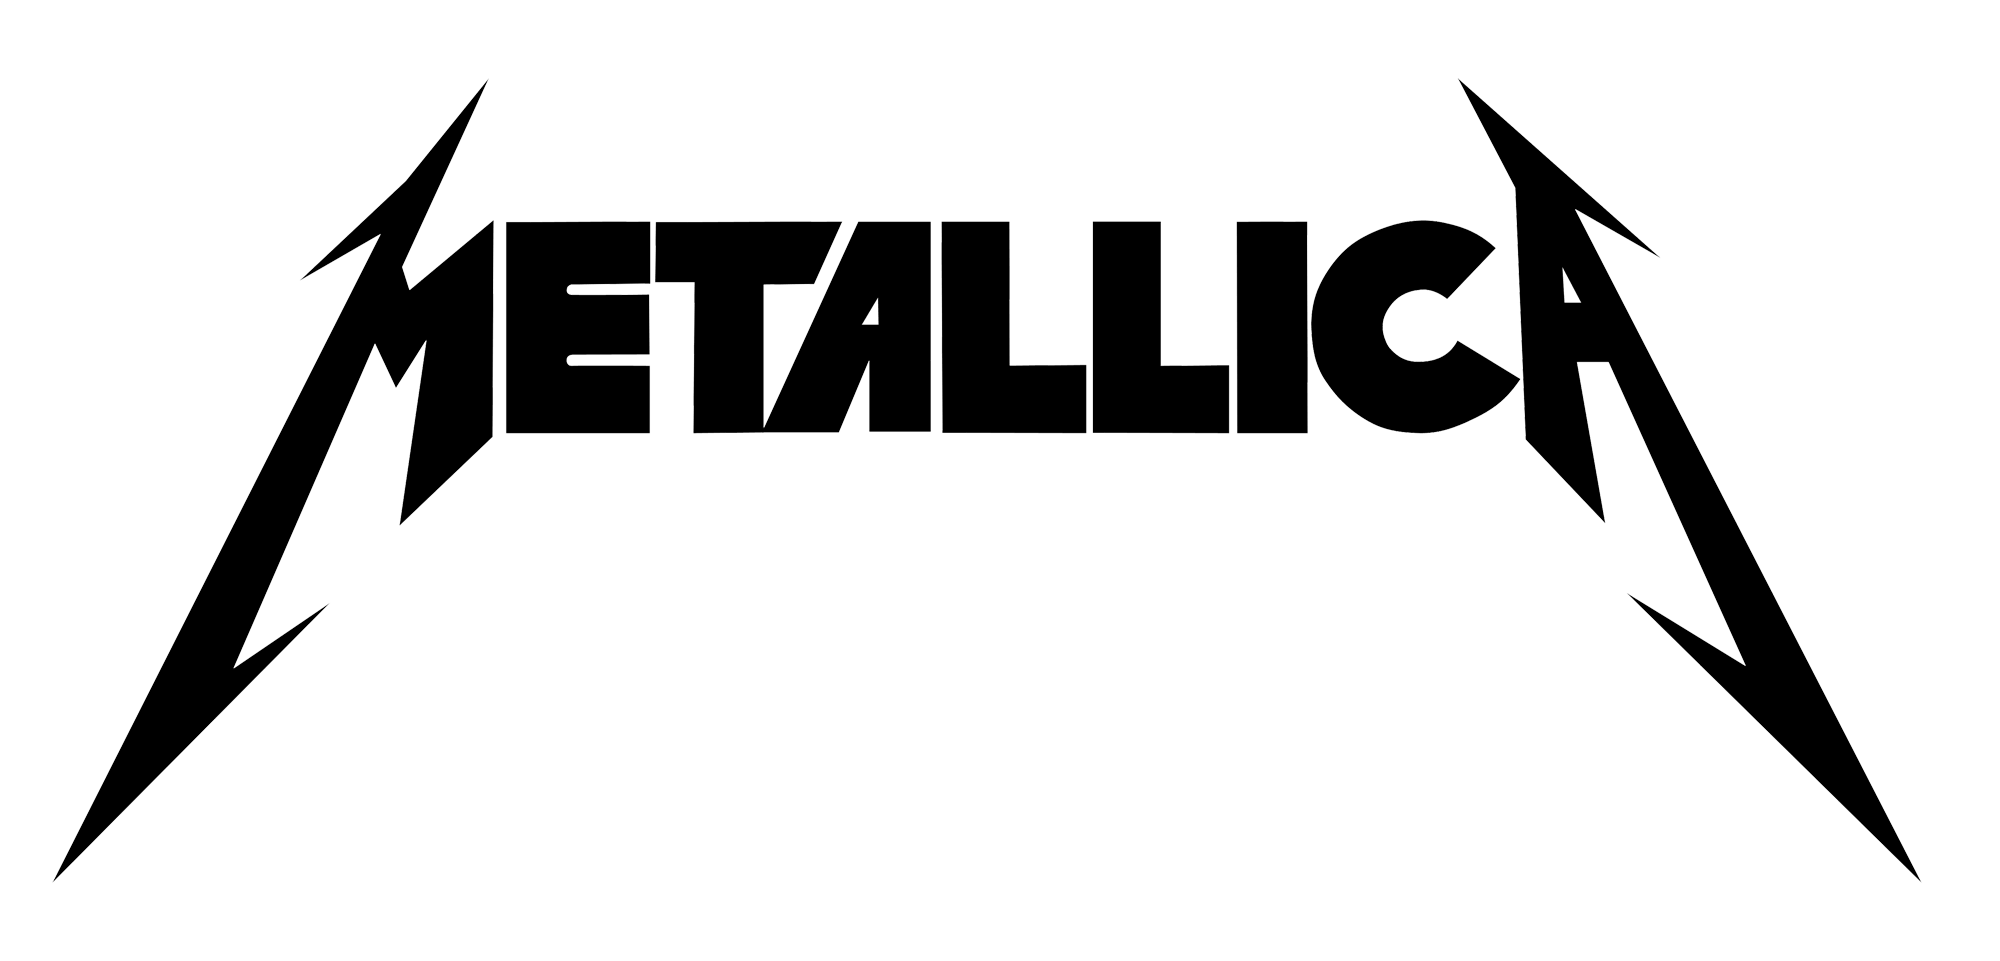 Metallica Red Logo - Metallica Logo, Metallica Symbol Meaning, History and Evolution